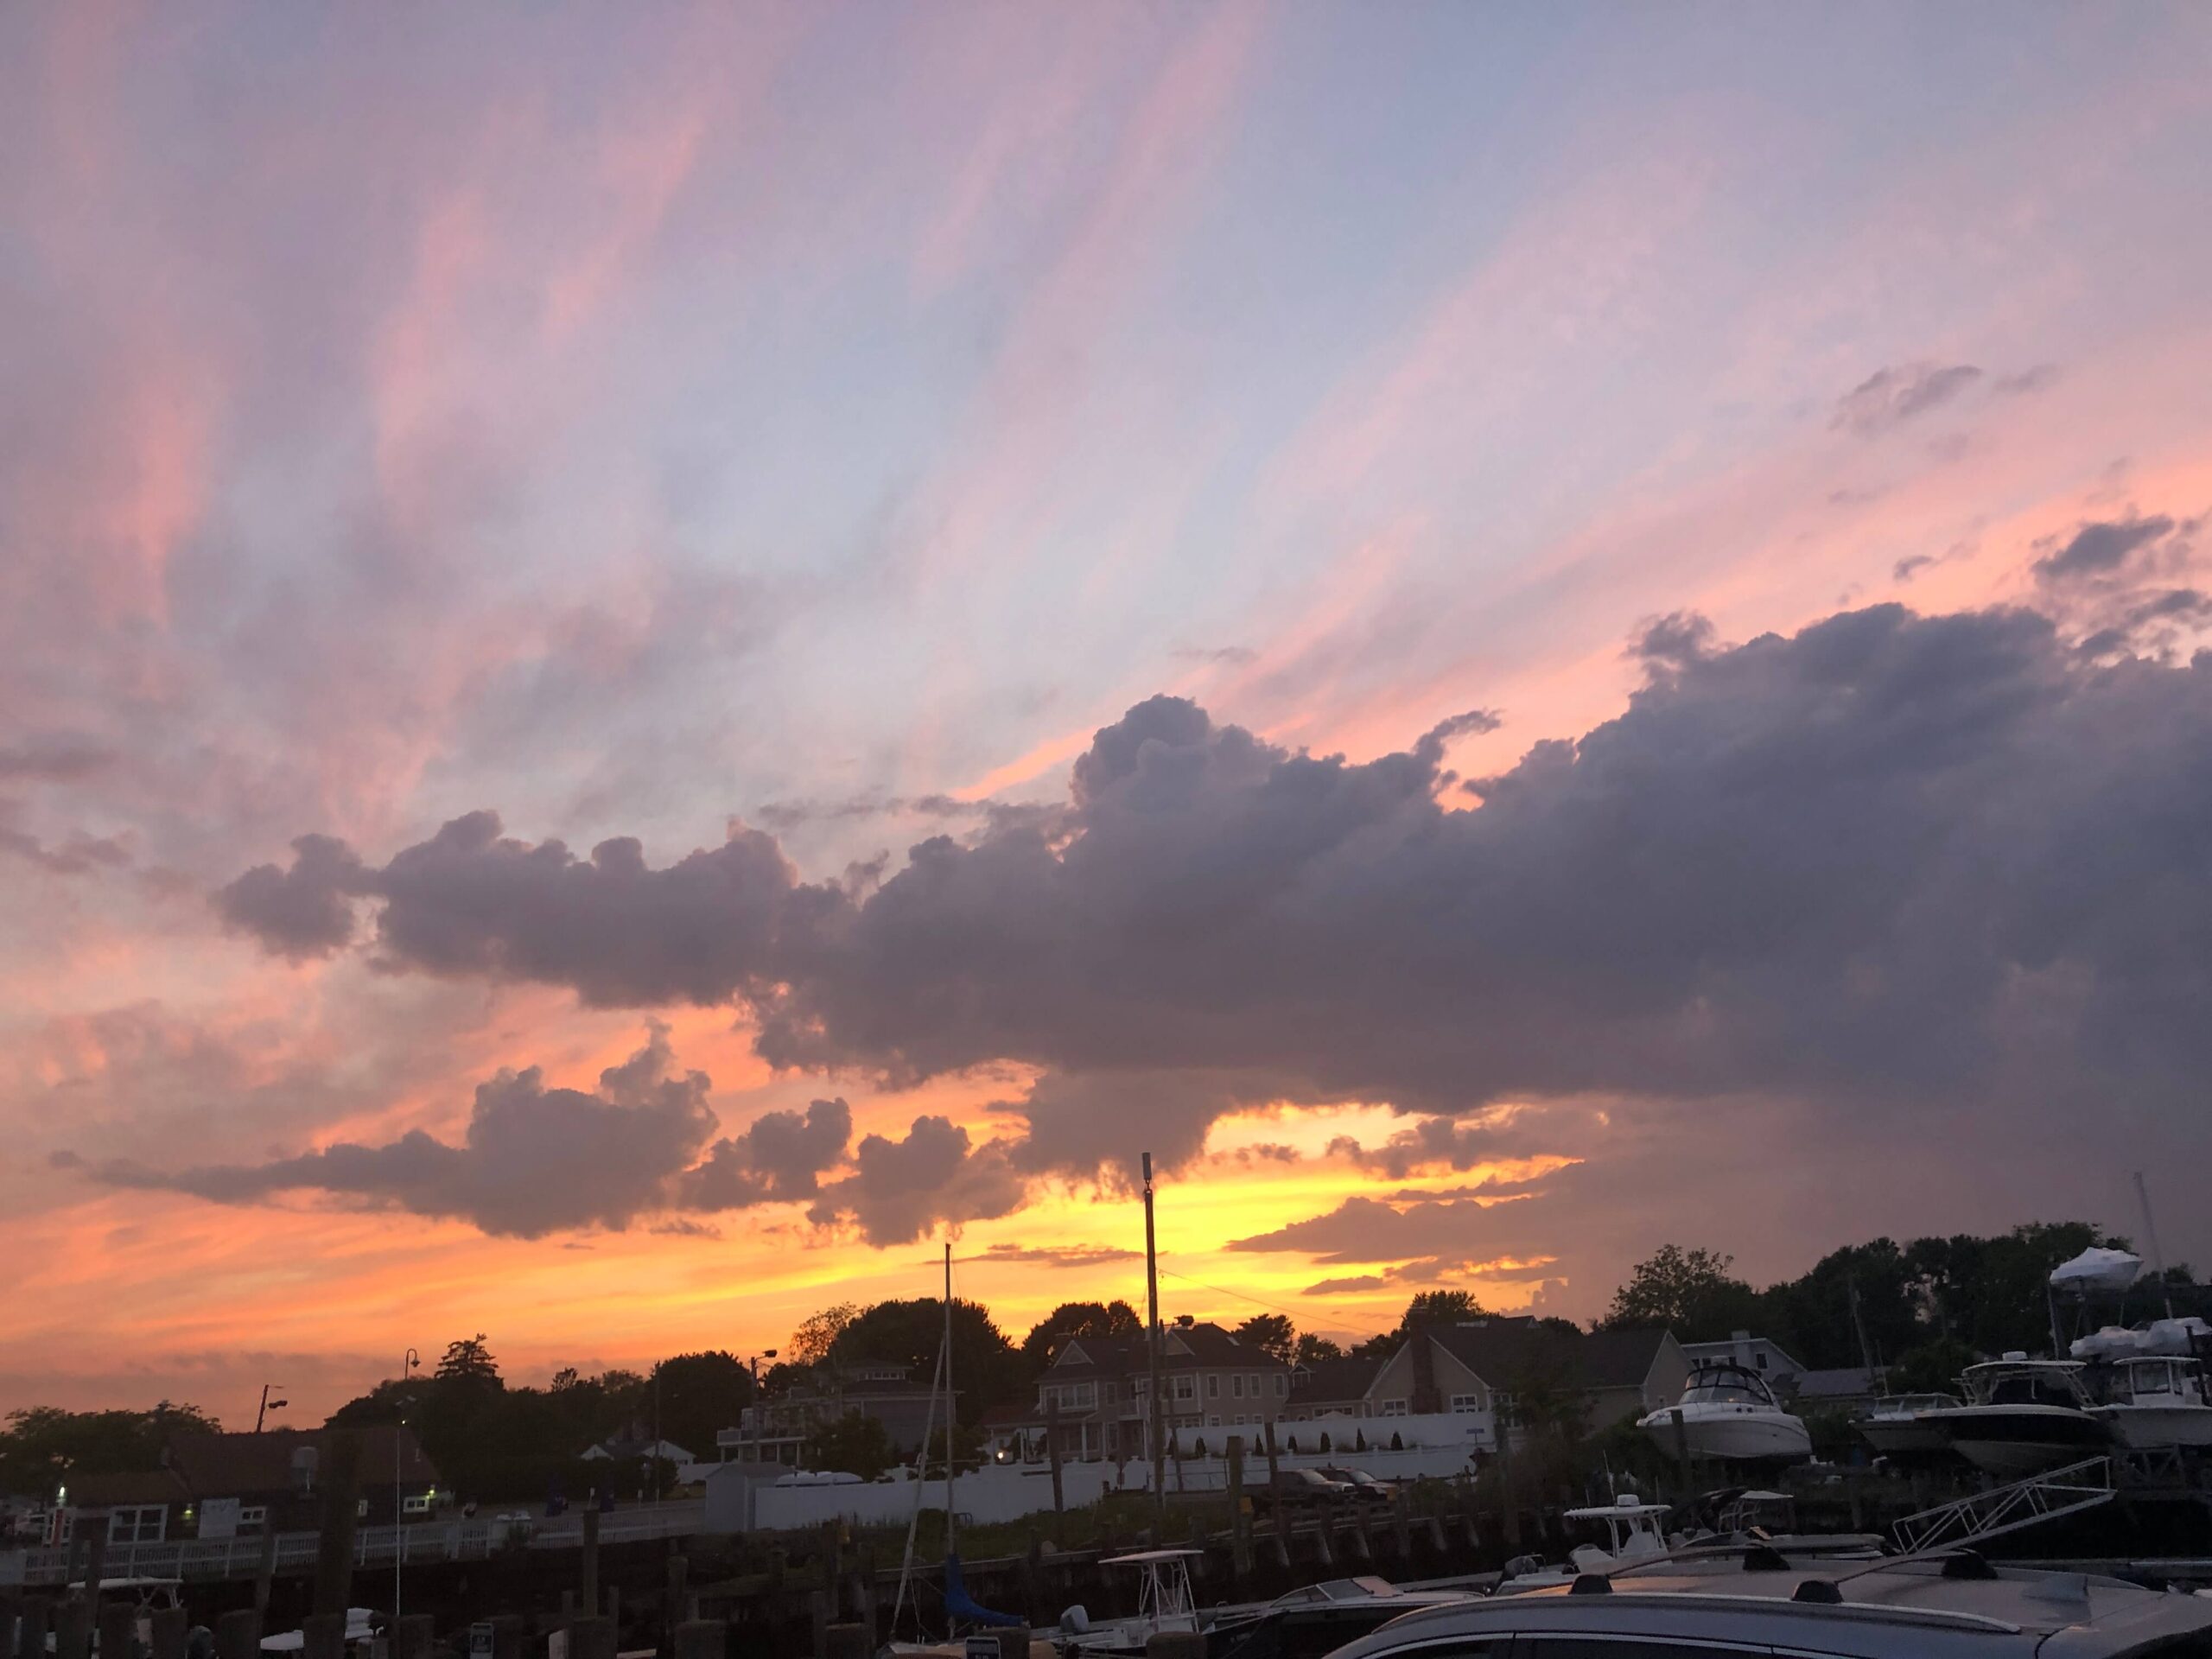 an incredible orange and pink sunset as seen at a marina full of boats on water in connecticut in new england usa